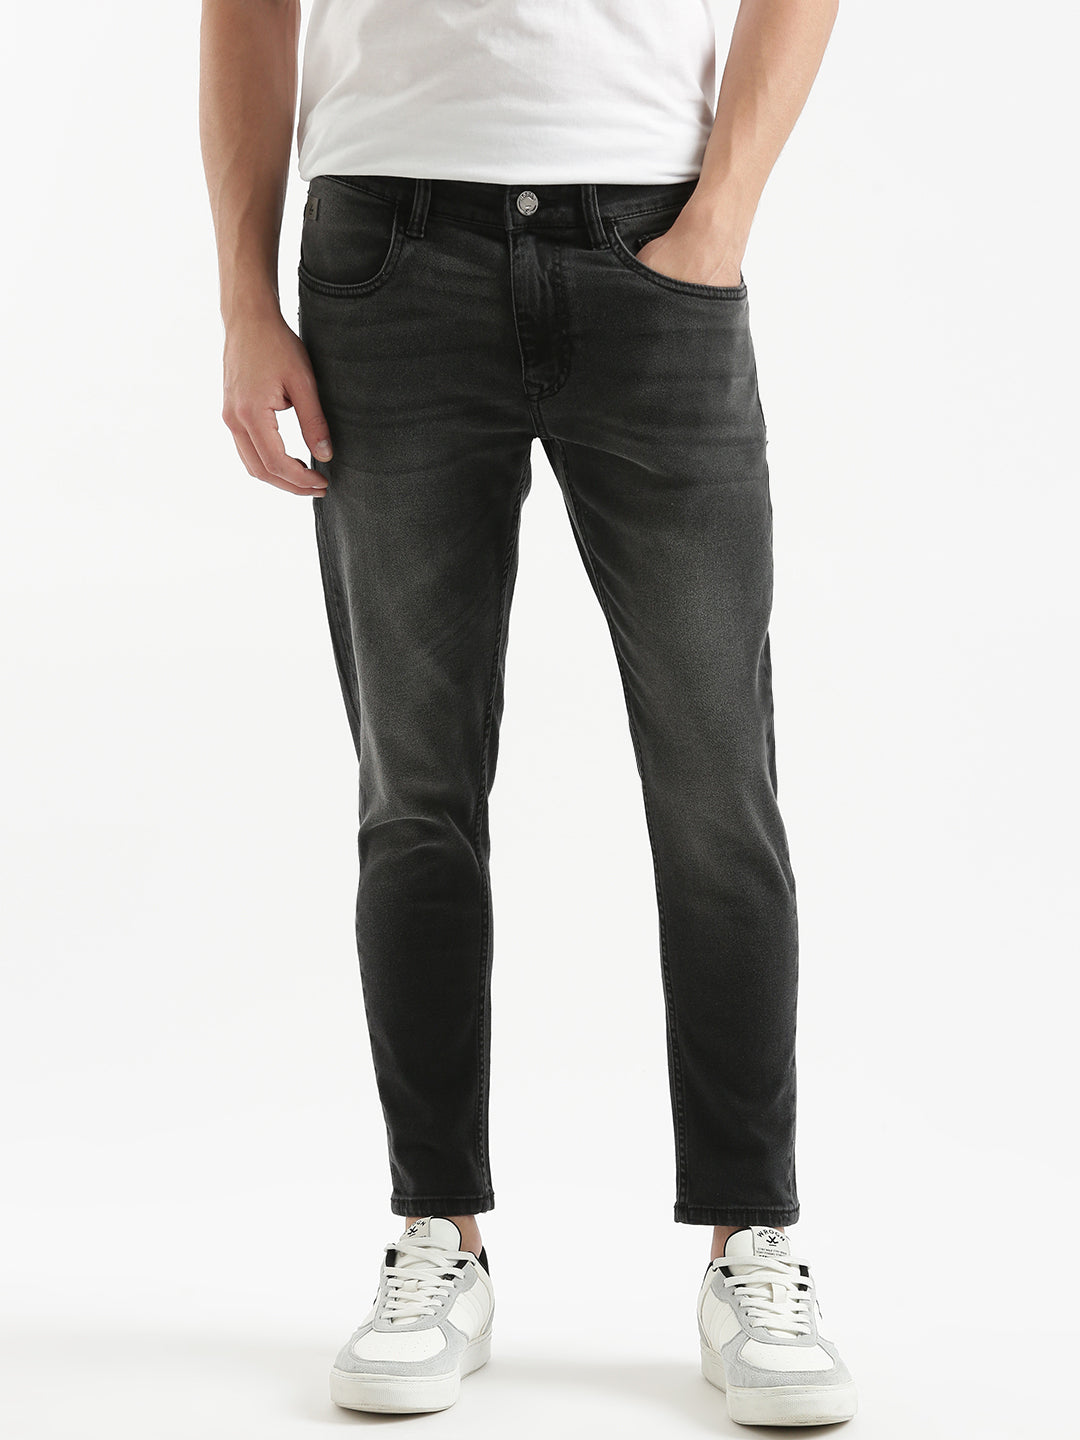 Graphite Grey Faded Jeans